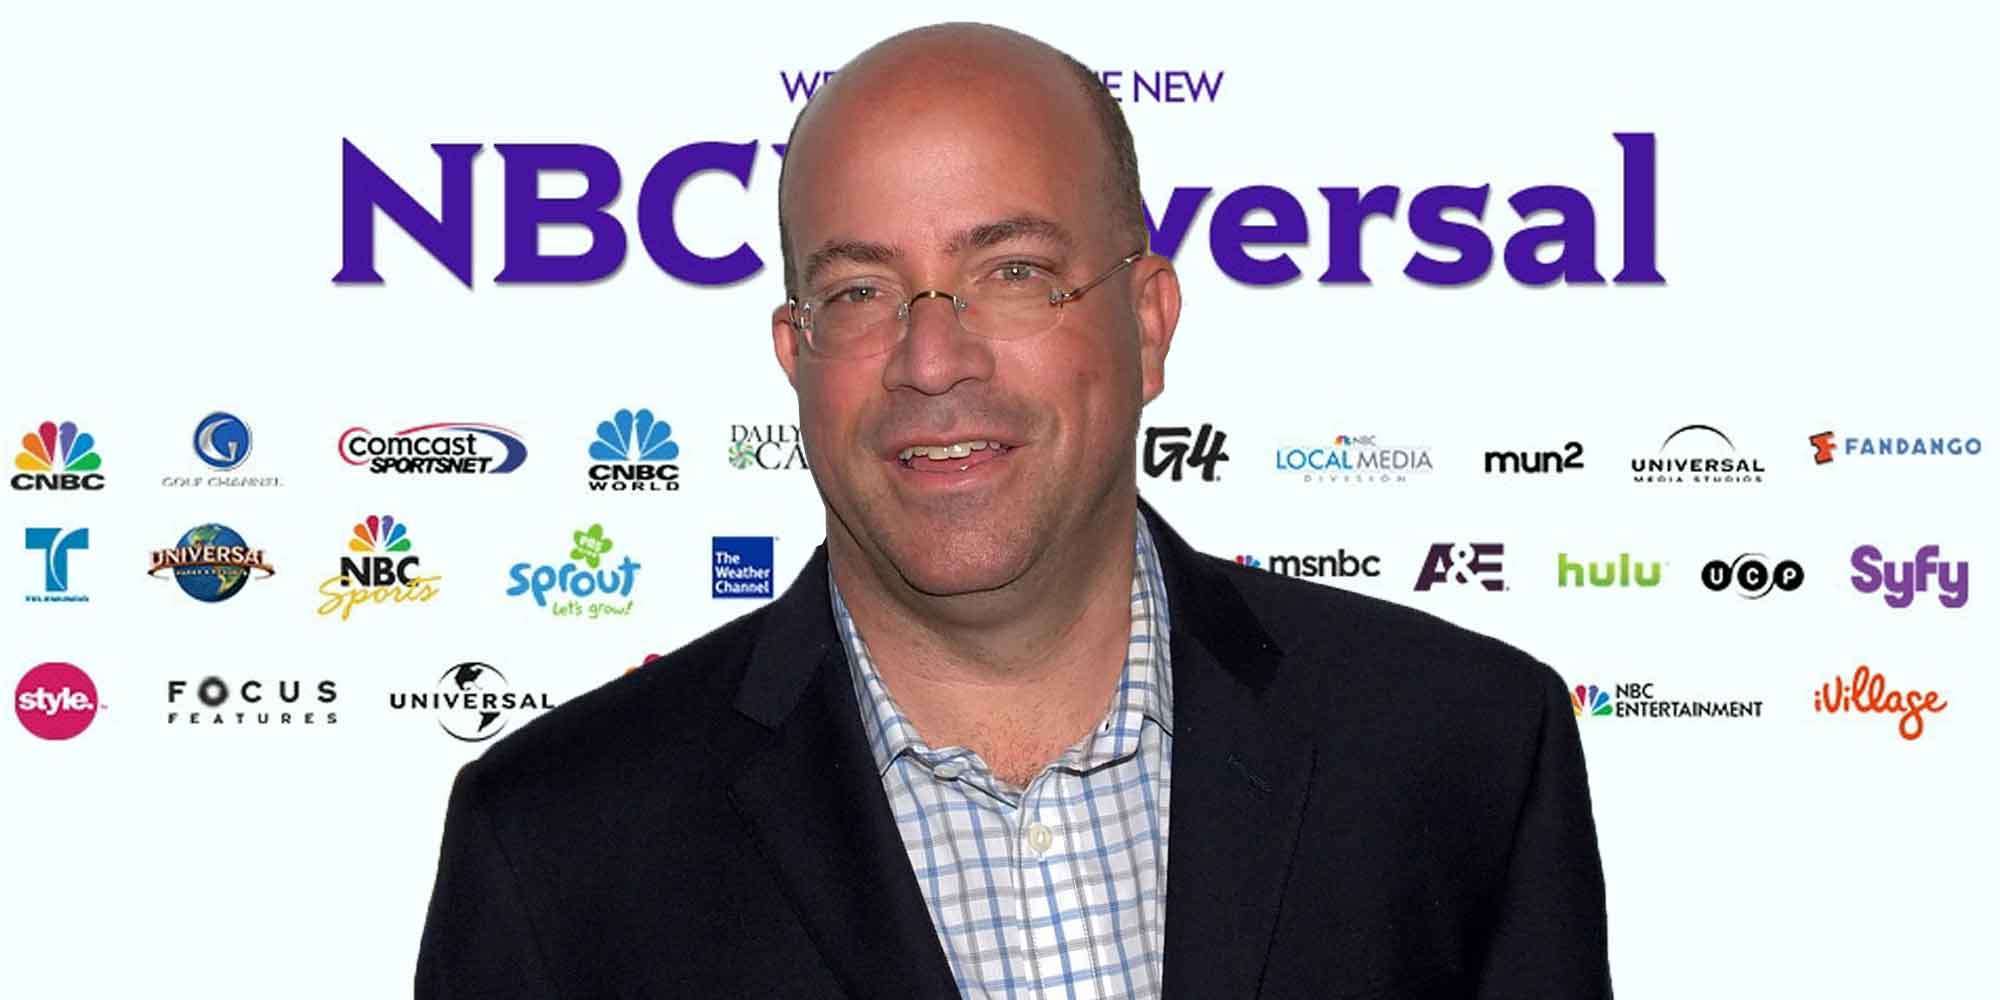 What Jeff Zucker Told Katie Couric When She Quit NBC (2006)